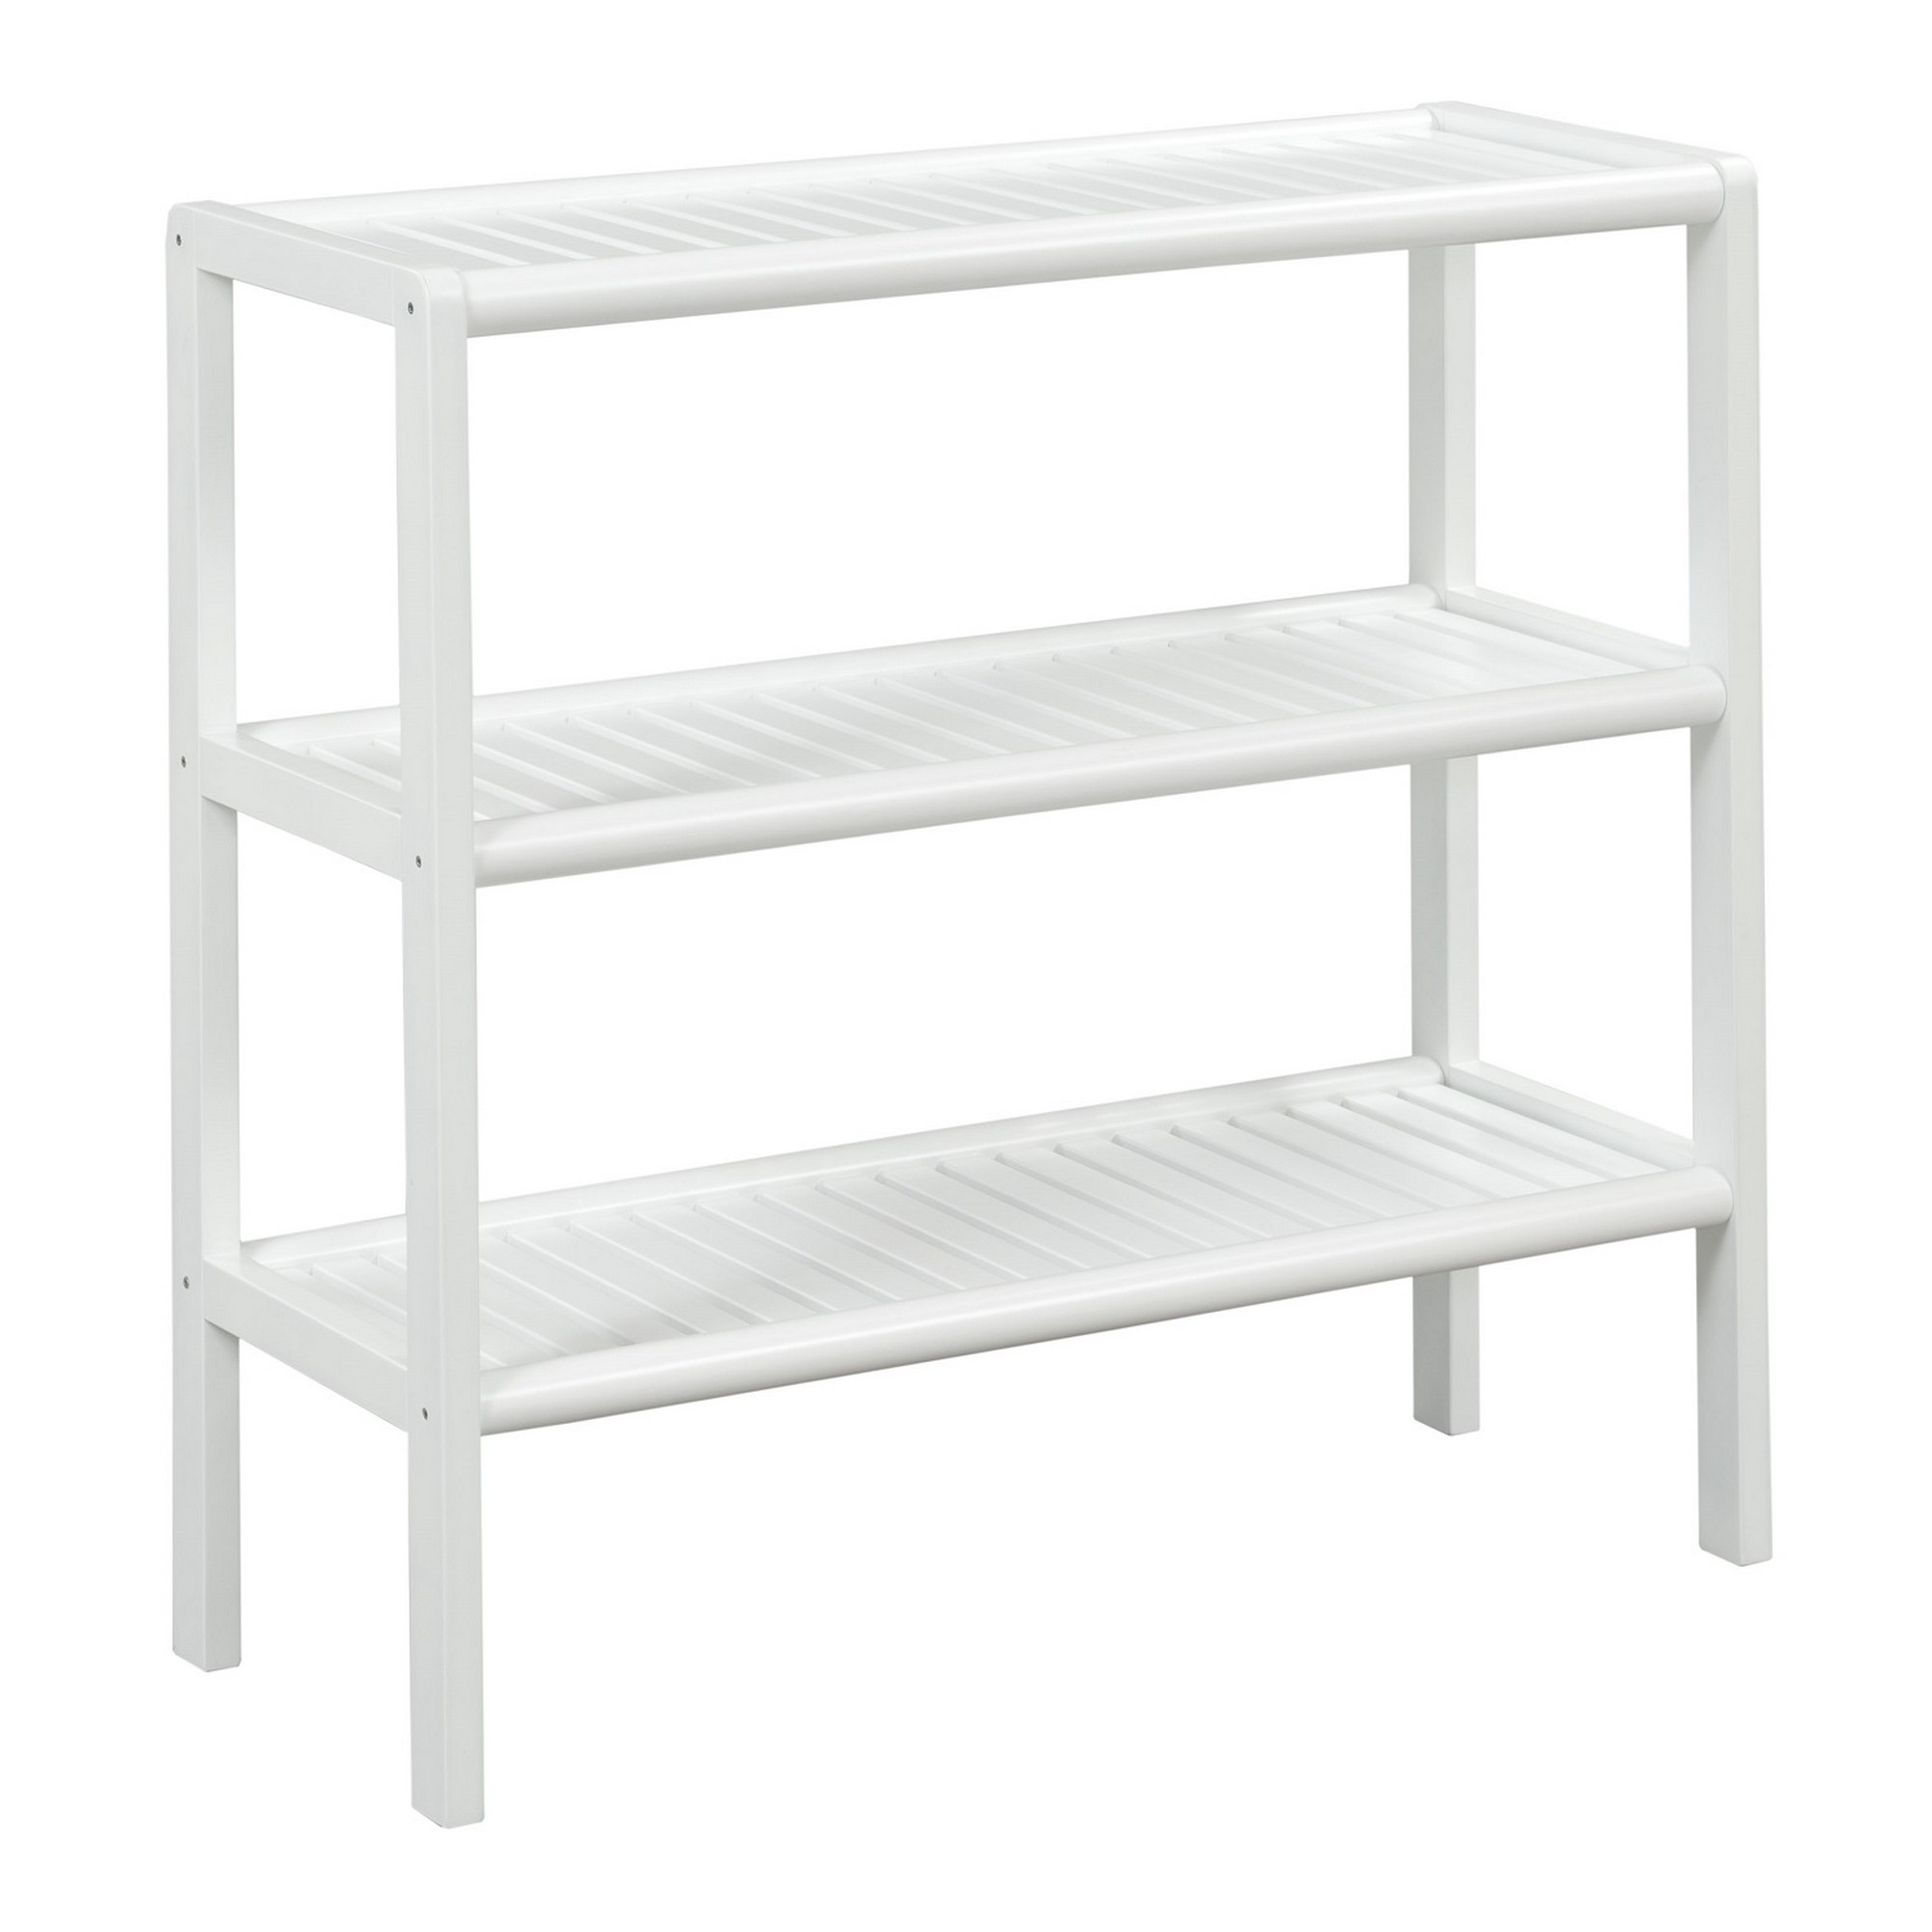 30" Bookcase with 3 Shelves in White